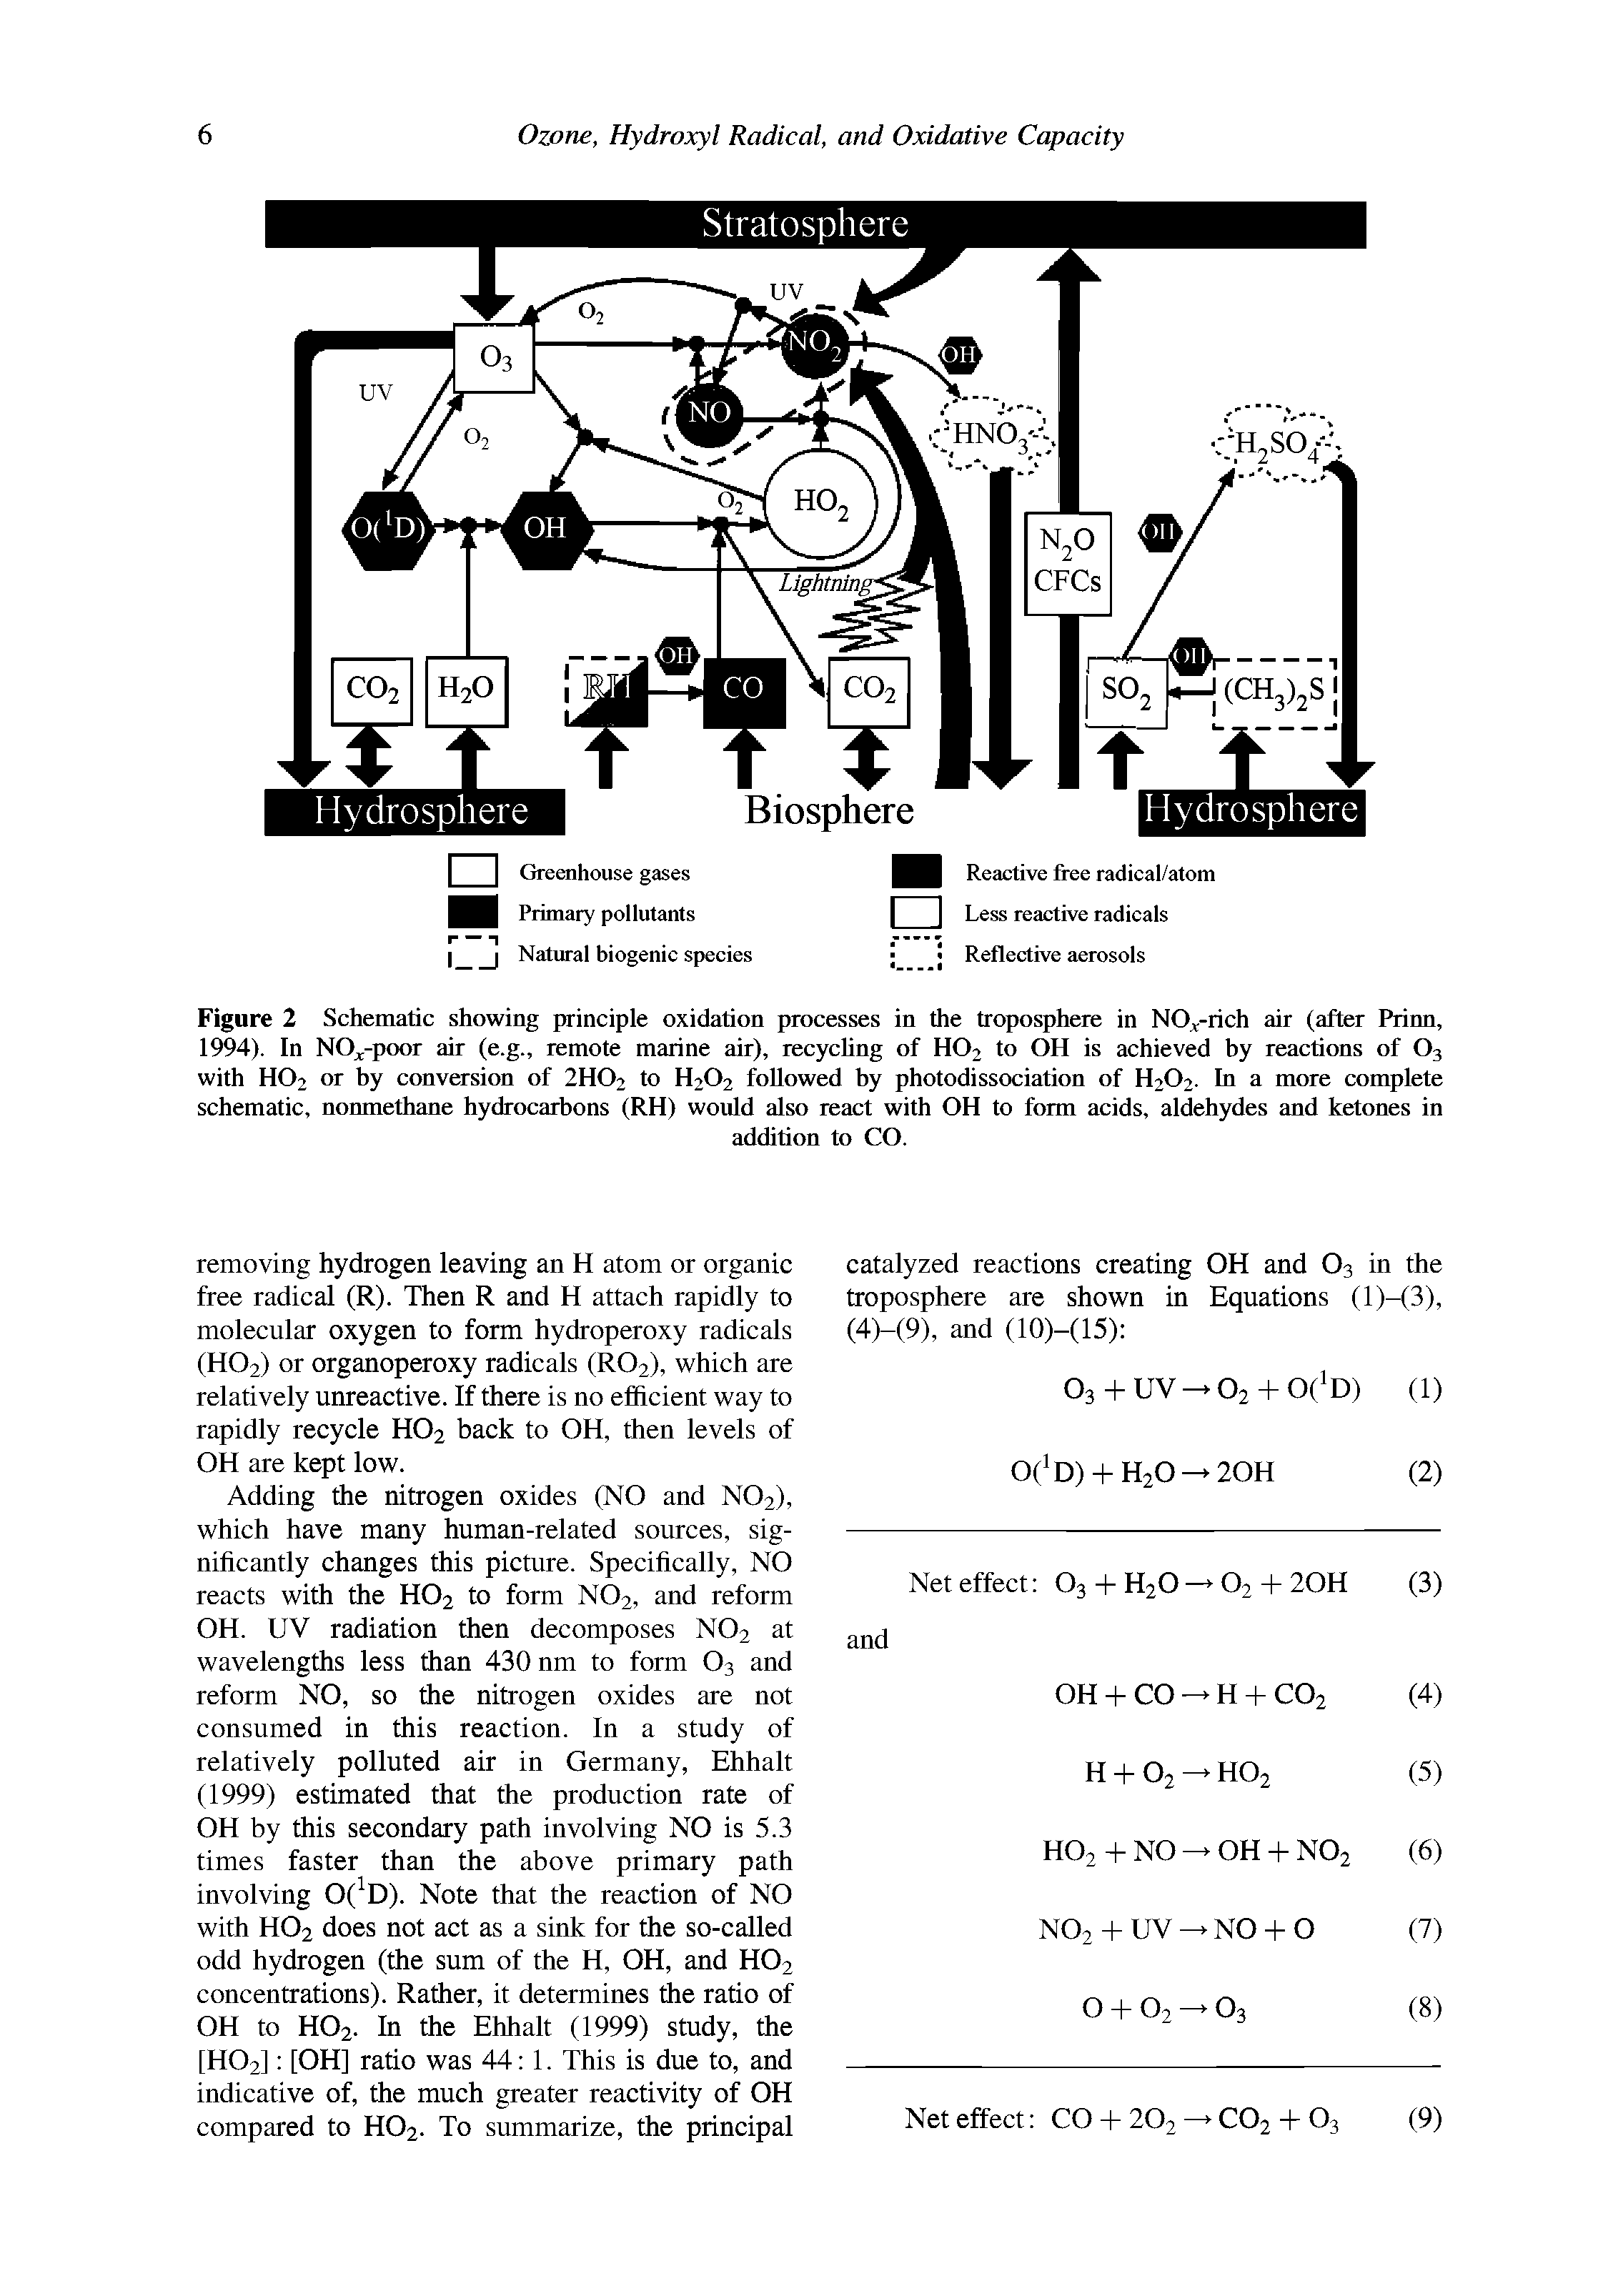 Figure 2 Schematic showing principle oxidation processes in the troposphere in NO -rich air (after Prinn, 1994). In NOj.-poor air (e.g., remote marine air), recychng of HO2 to OH is achieved hy reactions of O3 with HO2 or hy conversion of 2HO2 to H2O2 followed hy photodissociation of H2O2. In a more complete schematic, nonmethane hydrocarbons (RH) would also react with OH to form acids, aldehydes and ketones in...